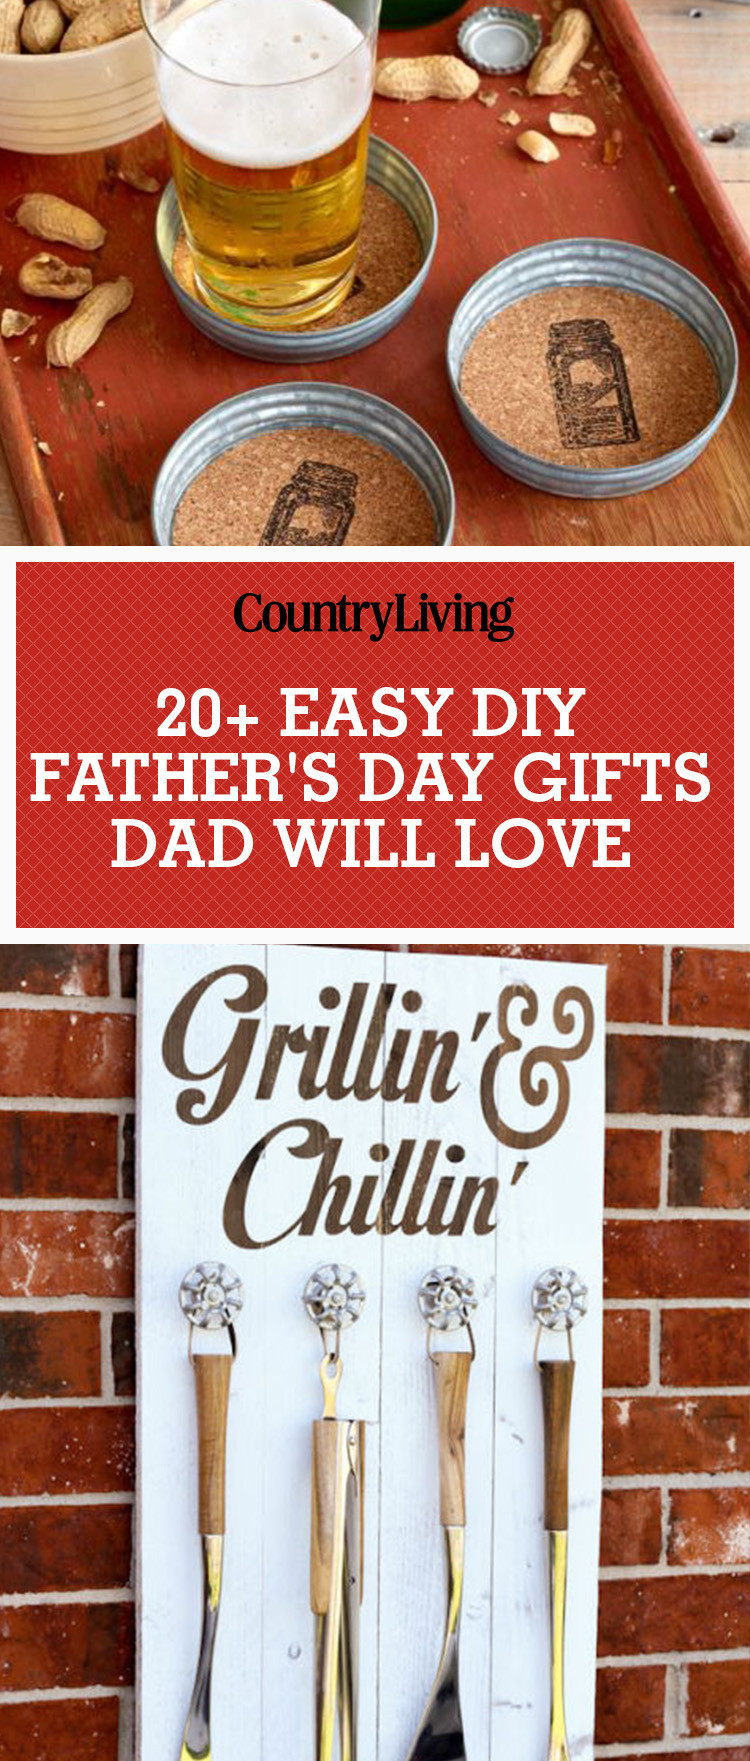 DIY Fathers Day Gift Ideas
 25 DIY Fathers Day Gifts & Crafts Homemade Ideas for